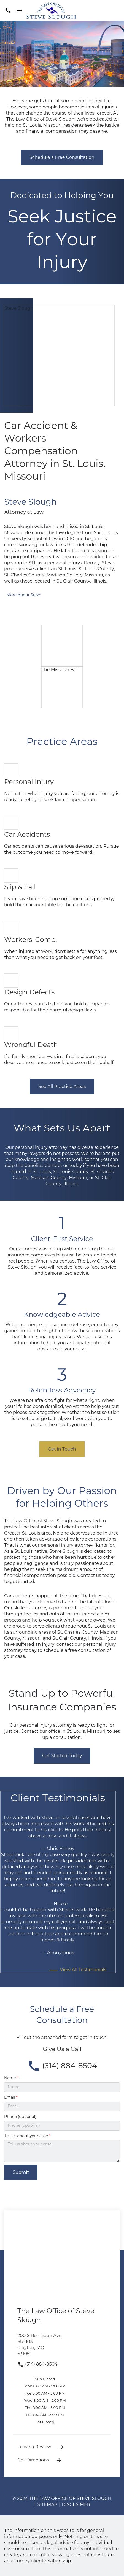 The Law Office of Steve Slough - St. Louis MO Lawyers